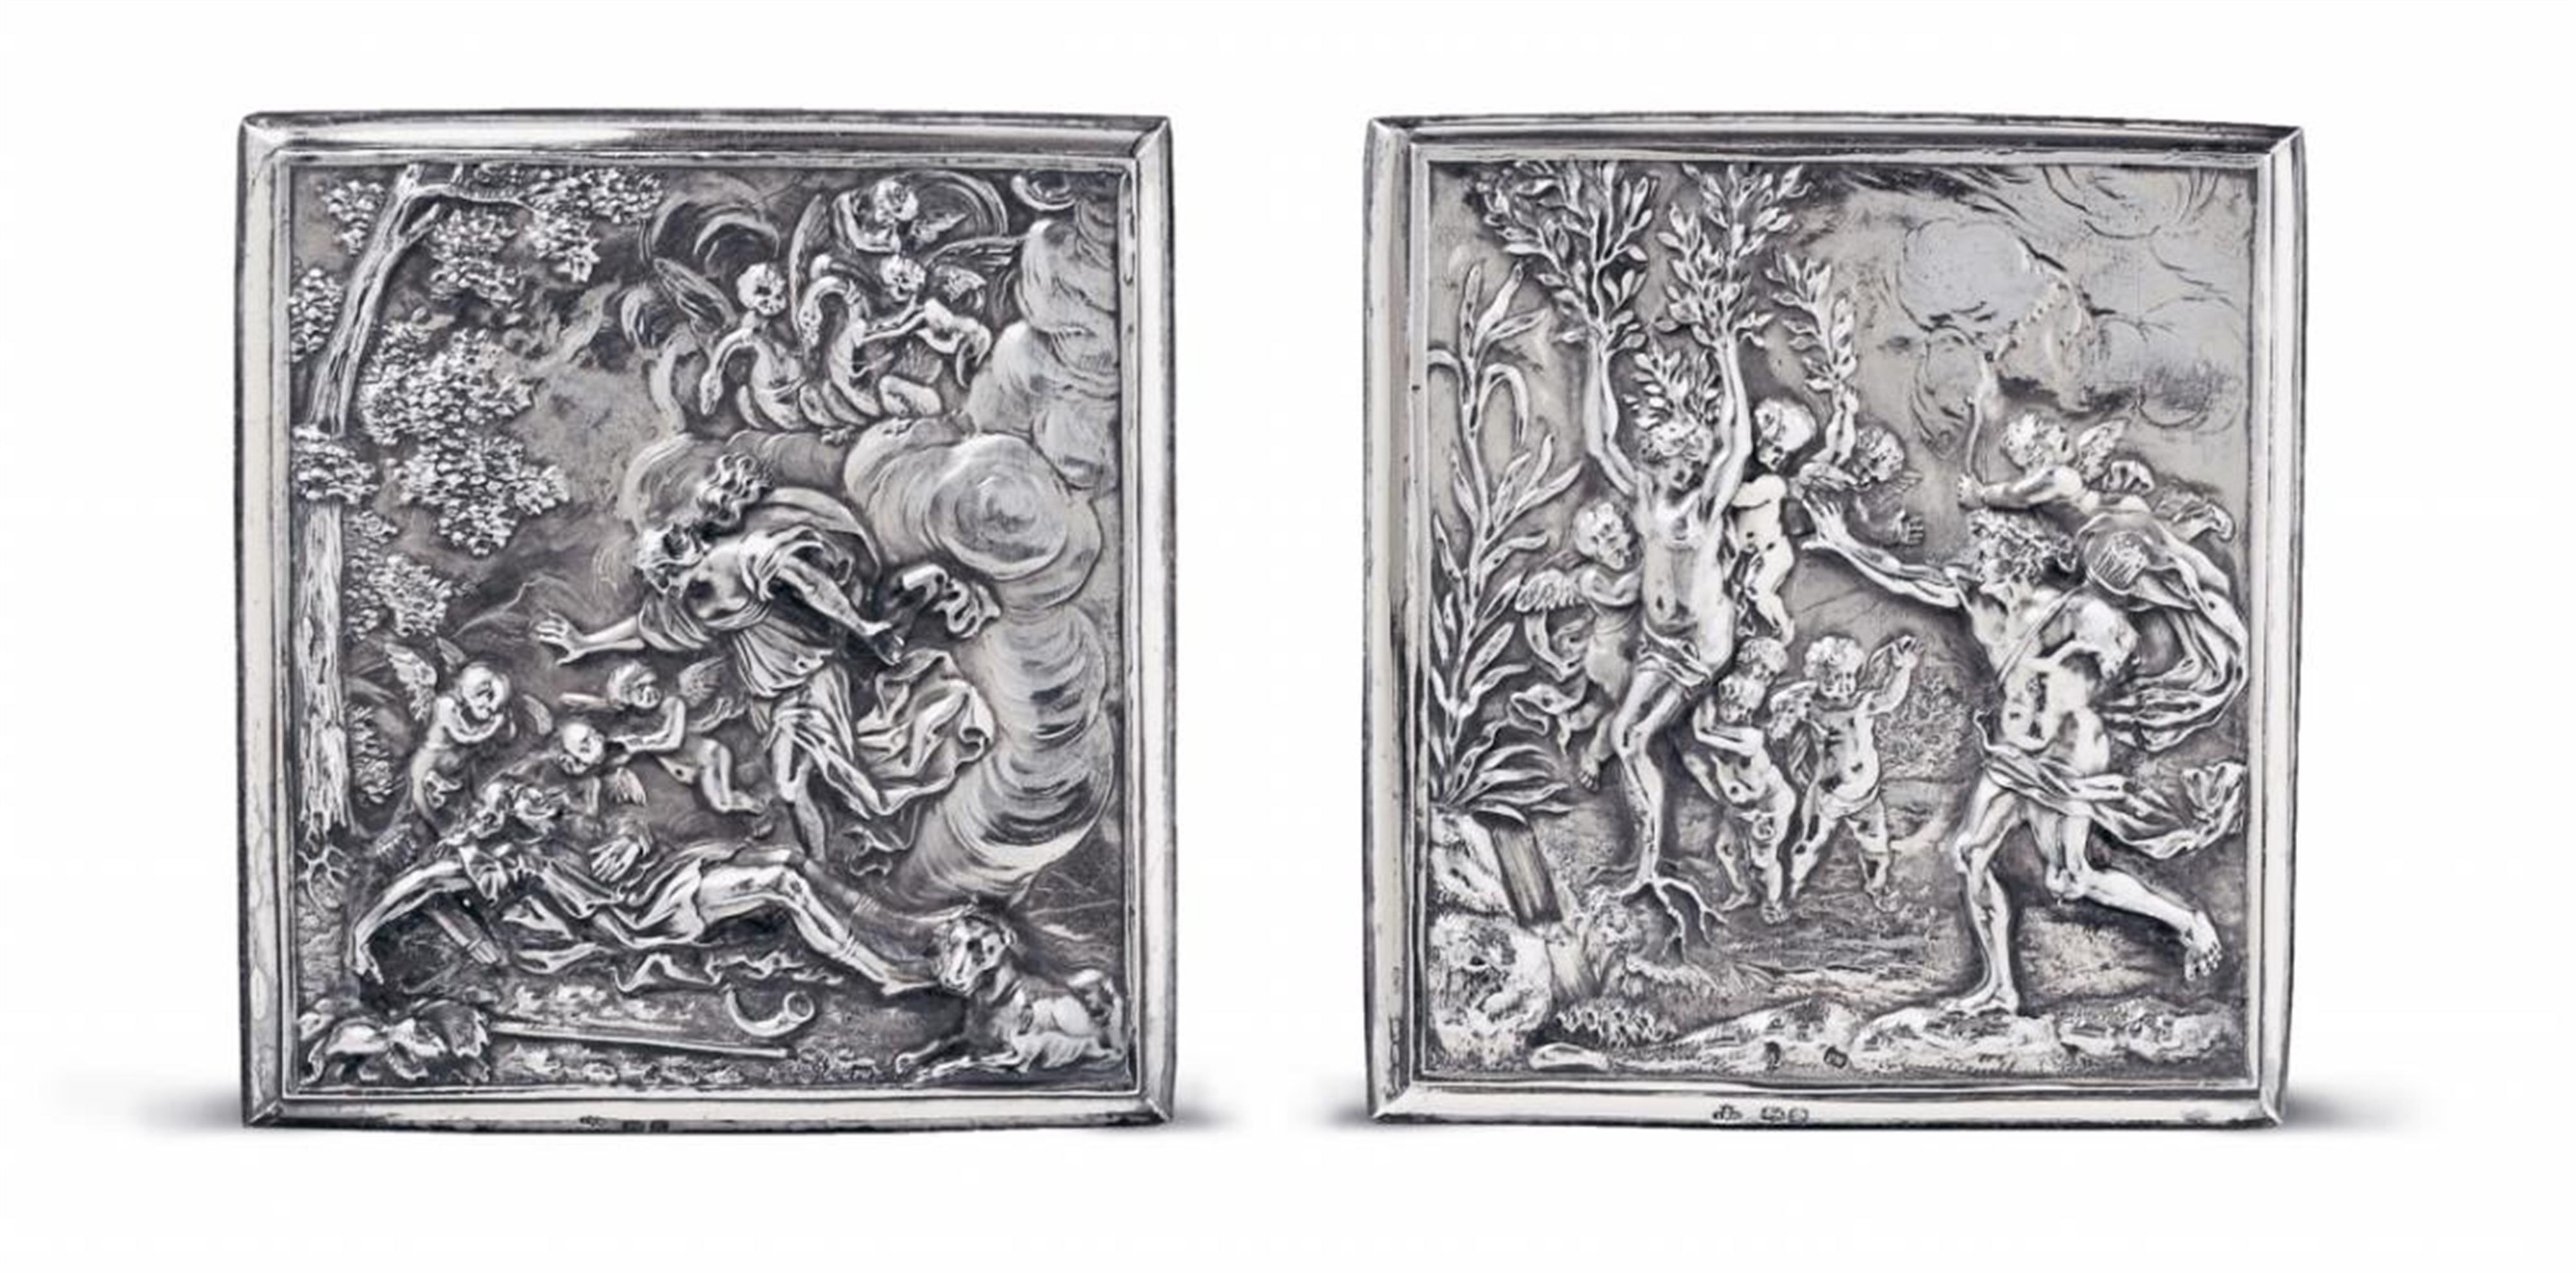 Two Augsburg silver reliefs with remains of gilt. Showing scenes of Venus mourning Adonis and Apollo with Daphne. Apollo's arm lost. Presented in later London silver frames marked John Samuel Hunt, 1853/54. Mounted together on a velvet-covered, gilt frame - image-2